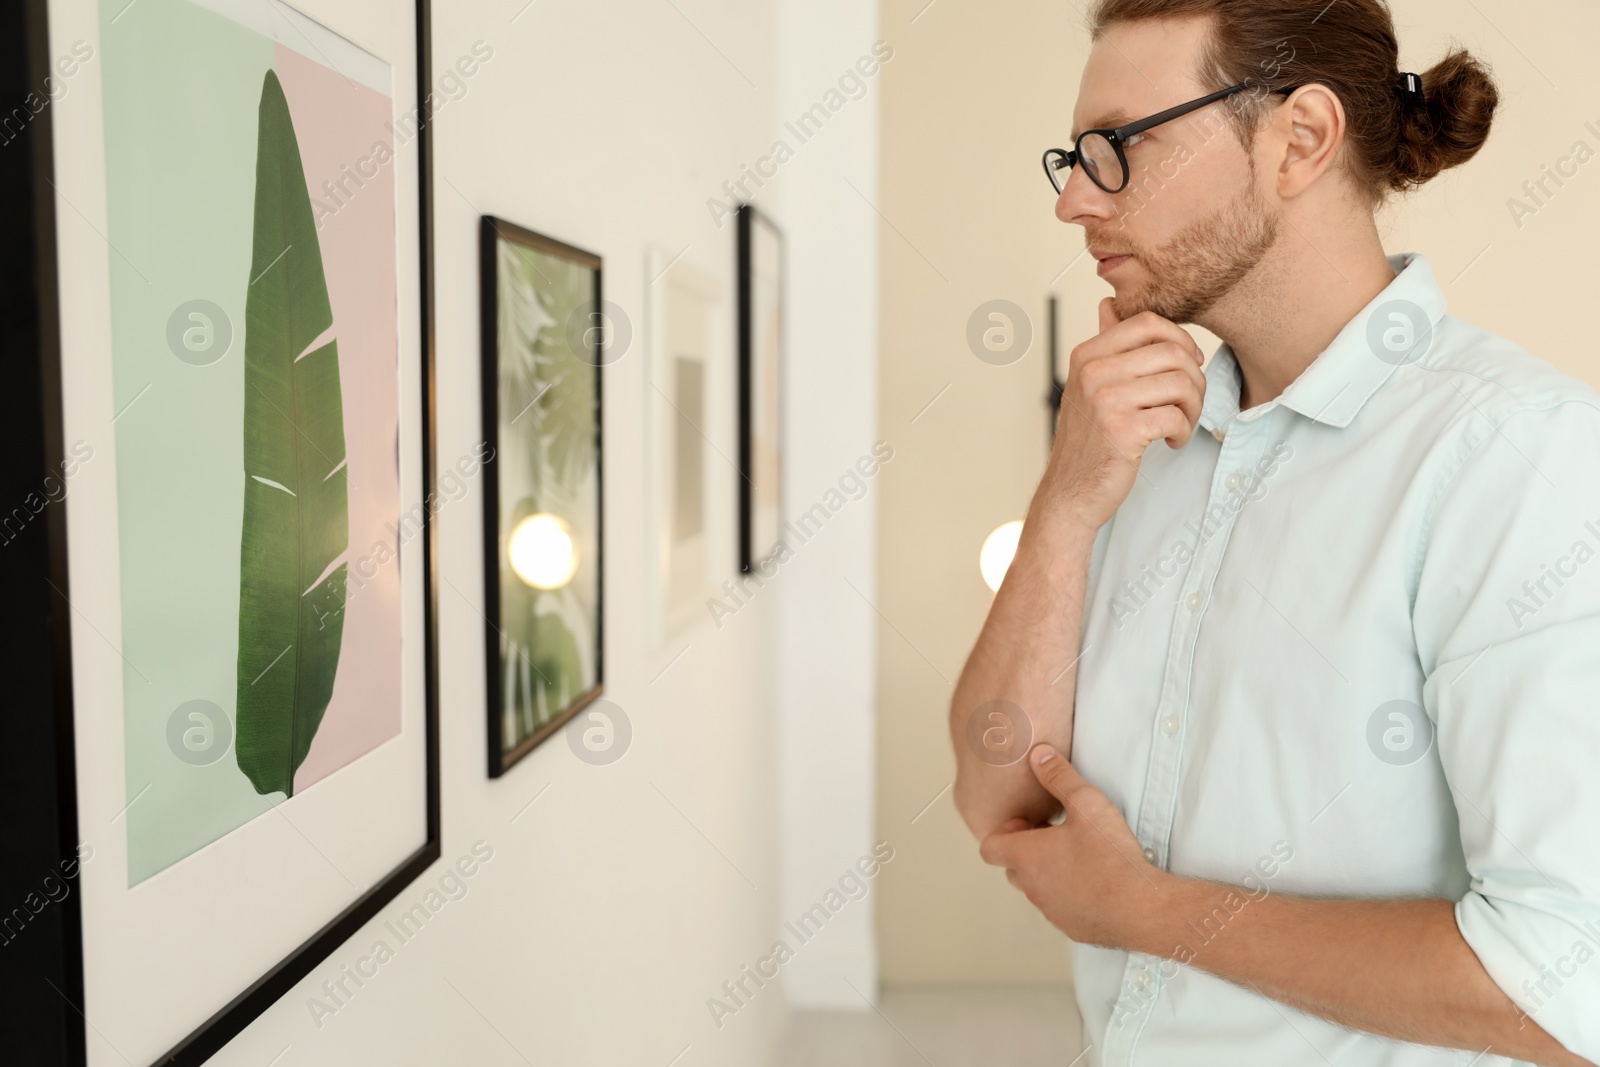 Photo of Handsome man at exhibition in art gallery